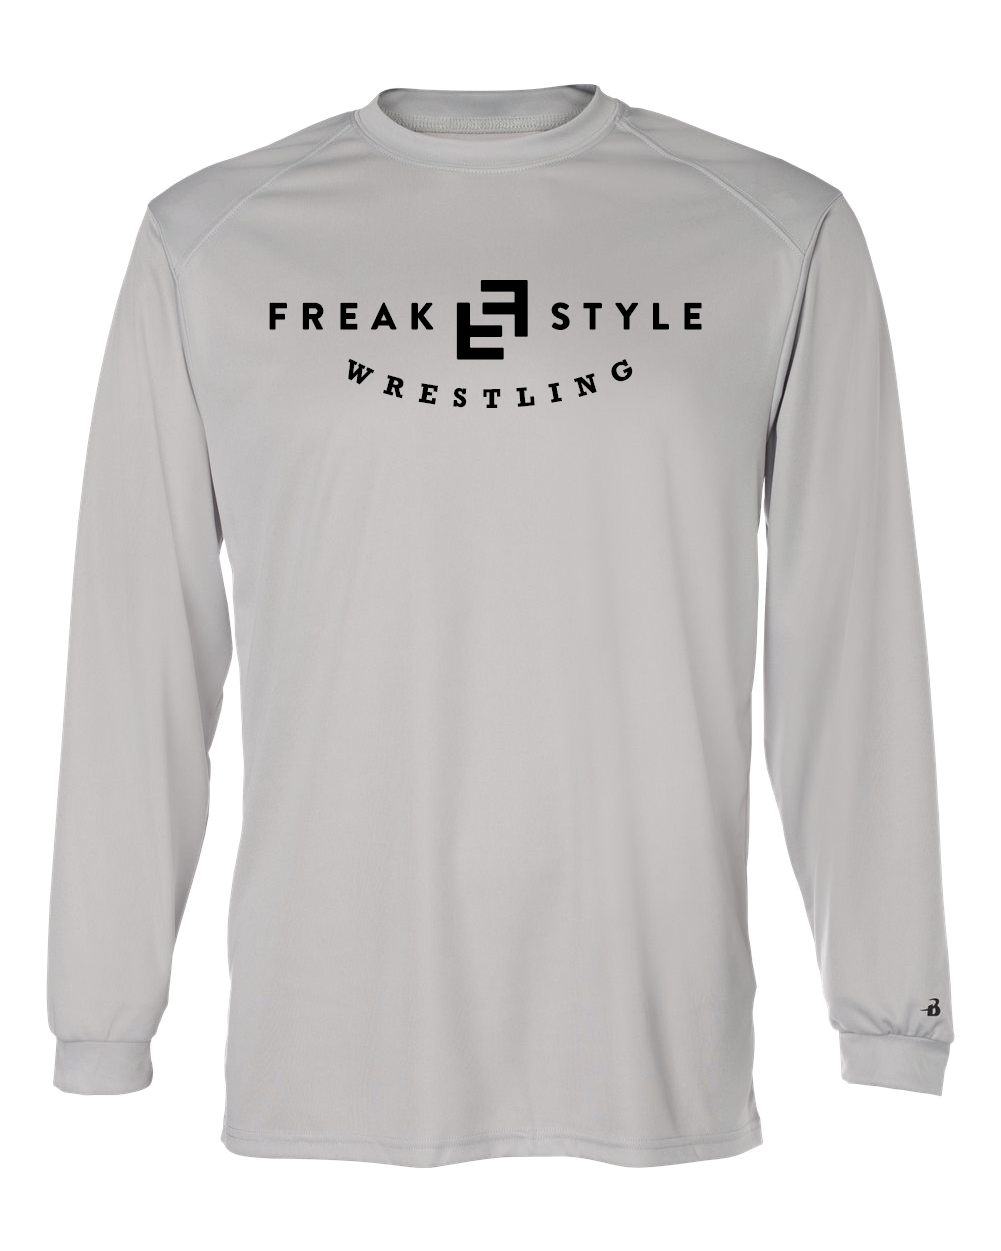 Freakstyle Logo (Performance Short and Long Sleeve)